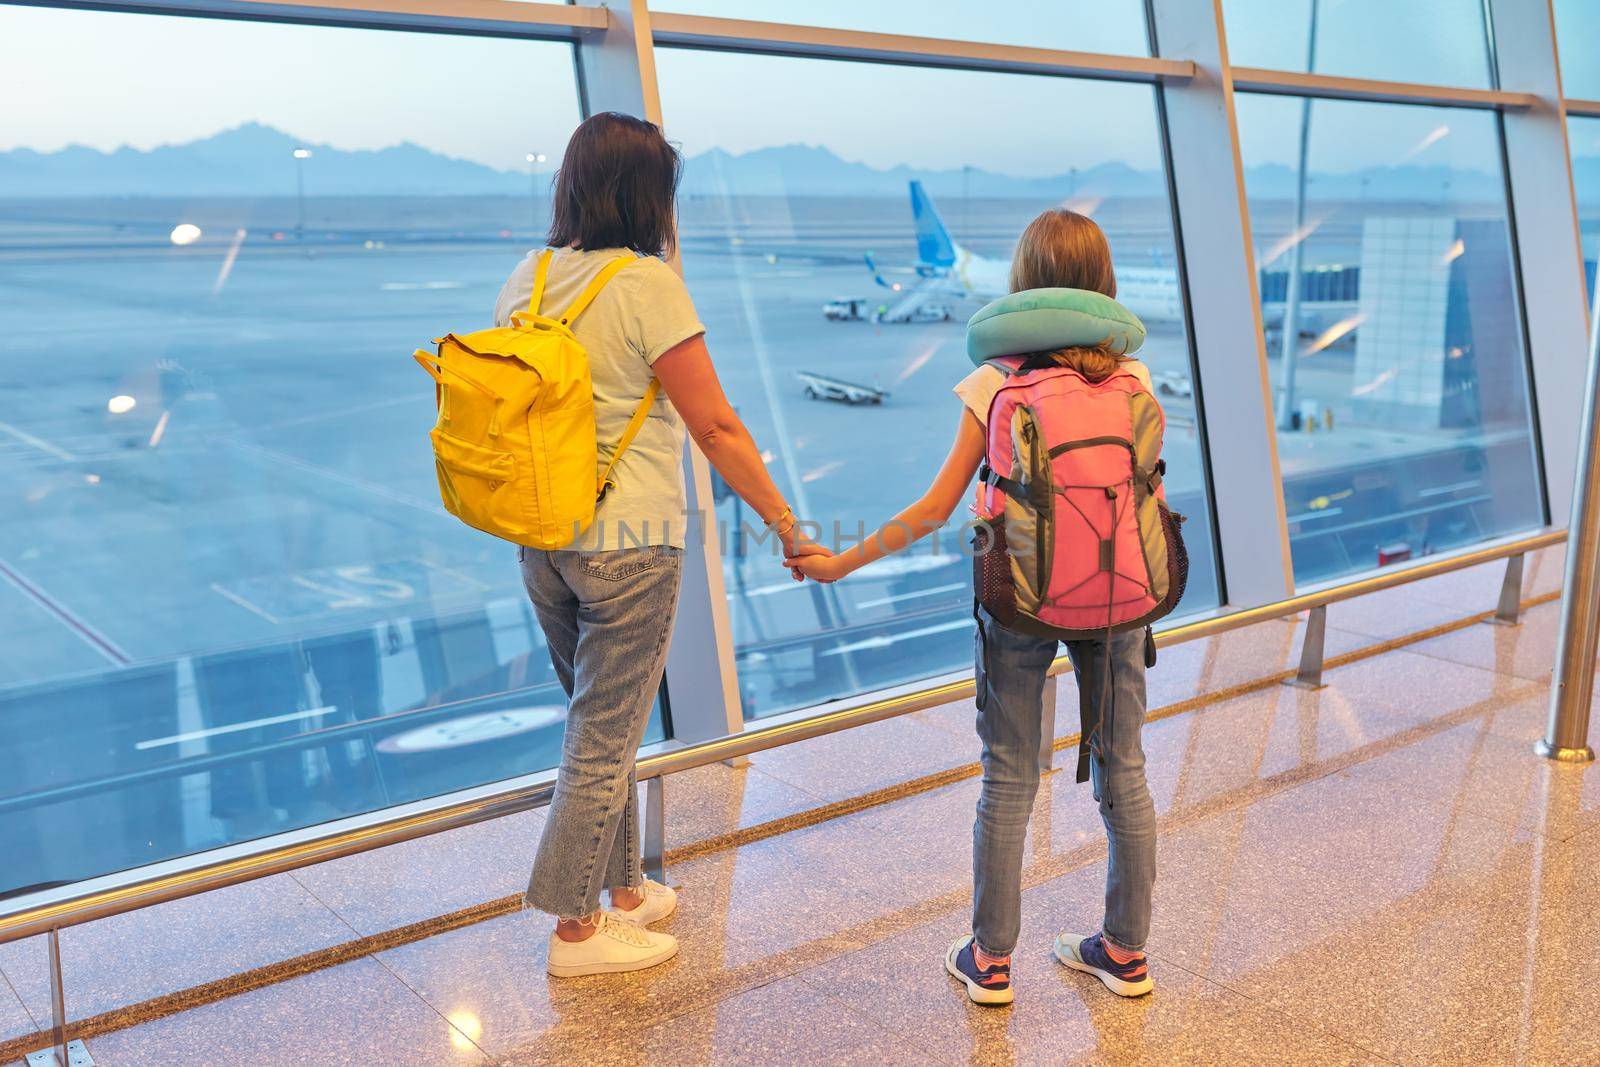 Airport passengers, standing with their backs family mother and daughter child looking at planes in panoramic window, awaiting boarding, copy space